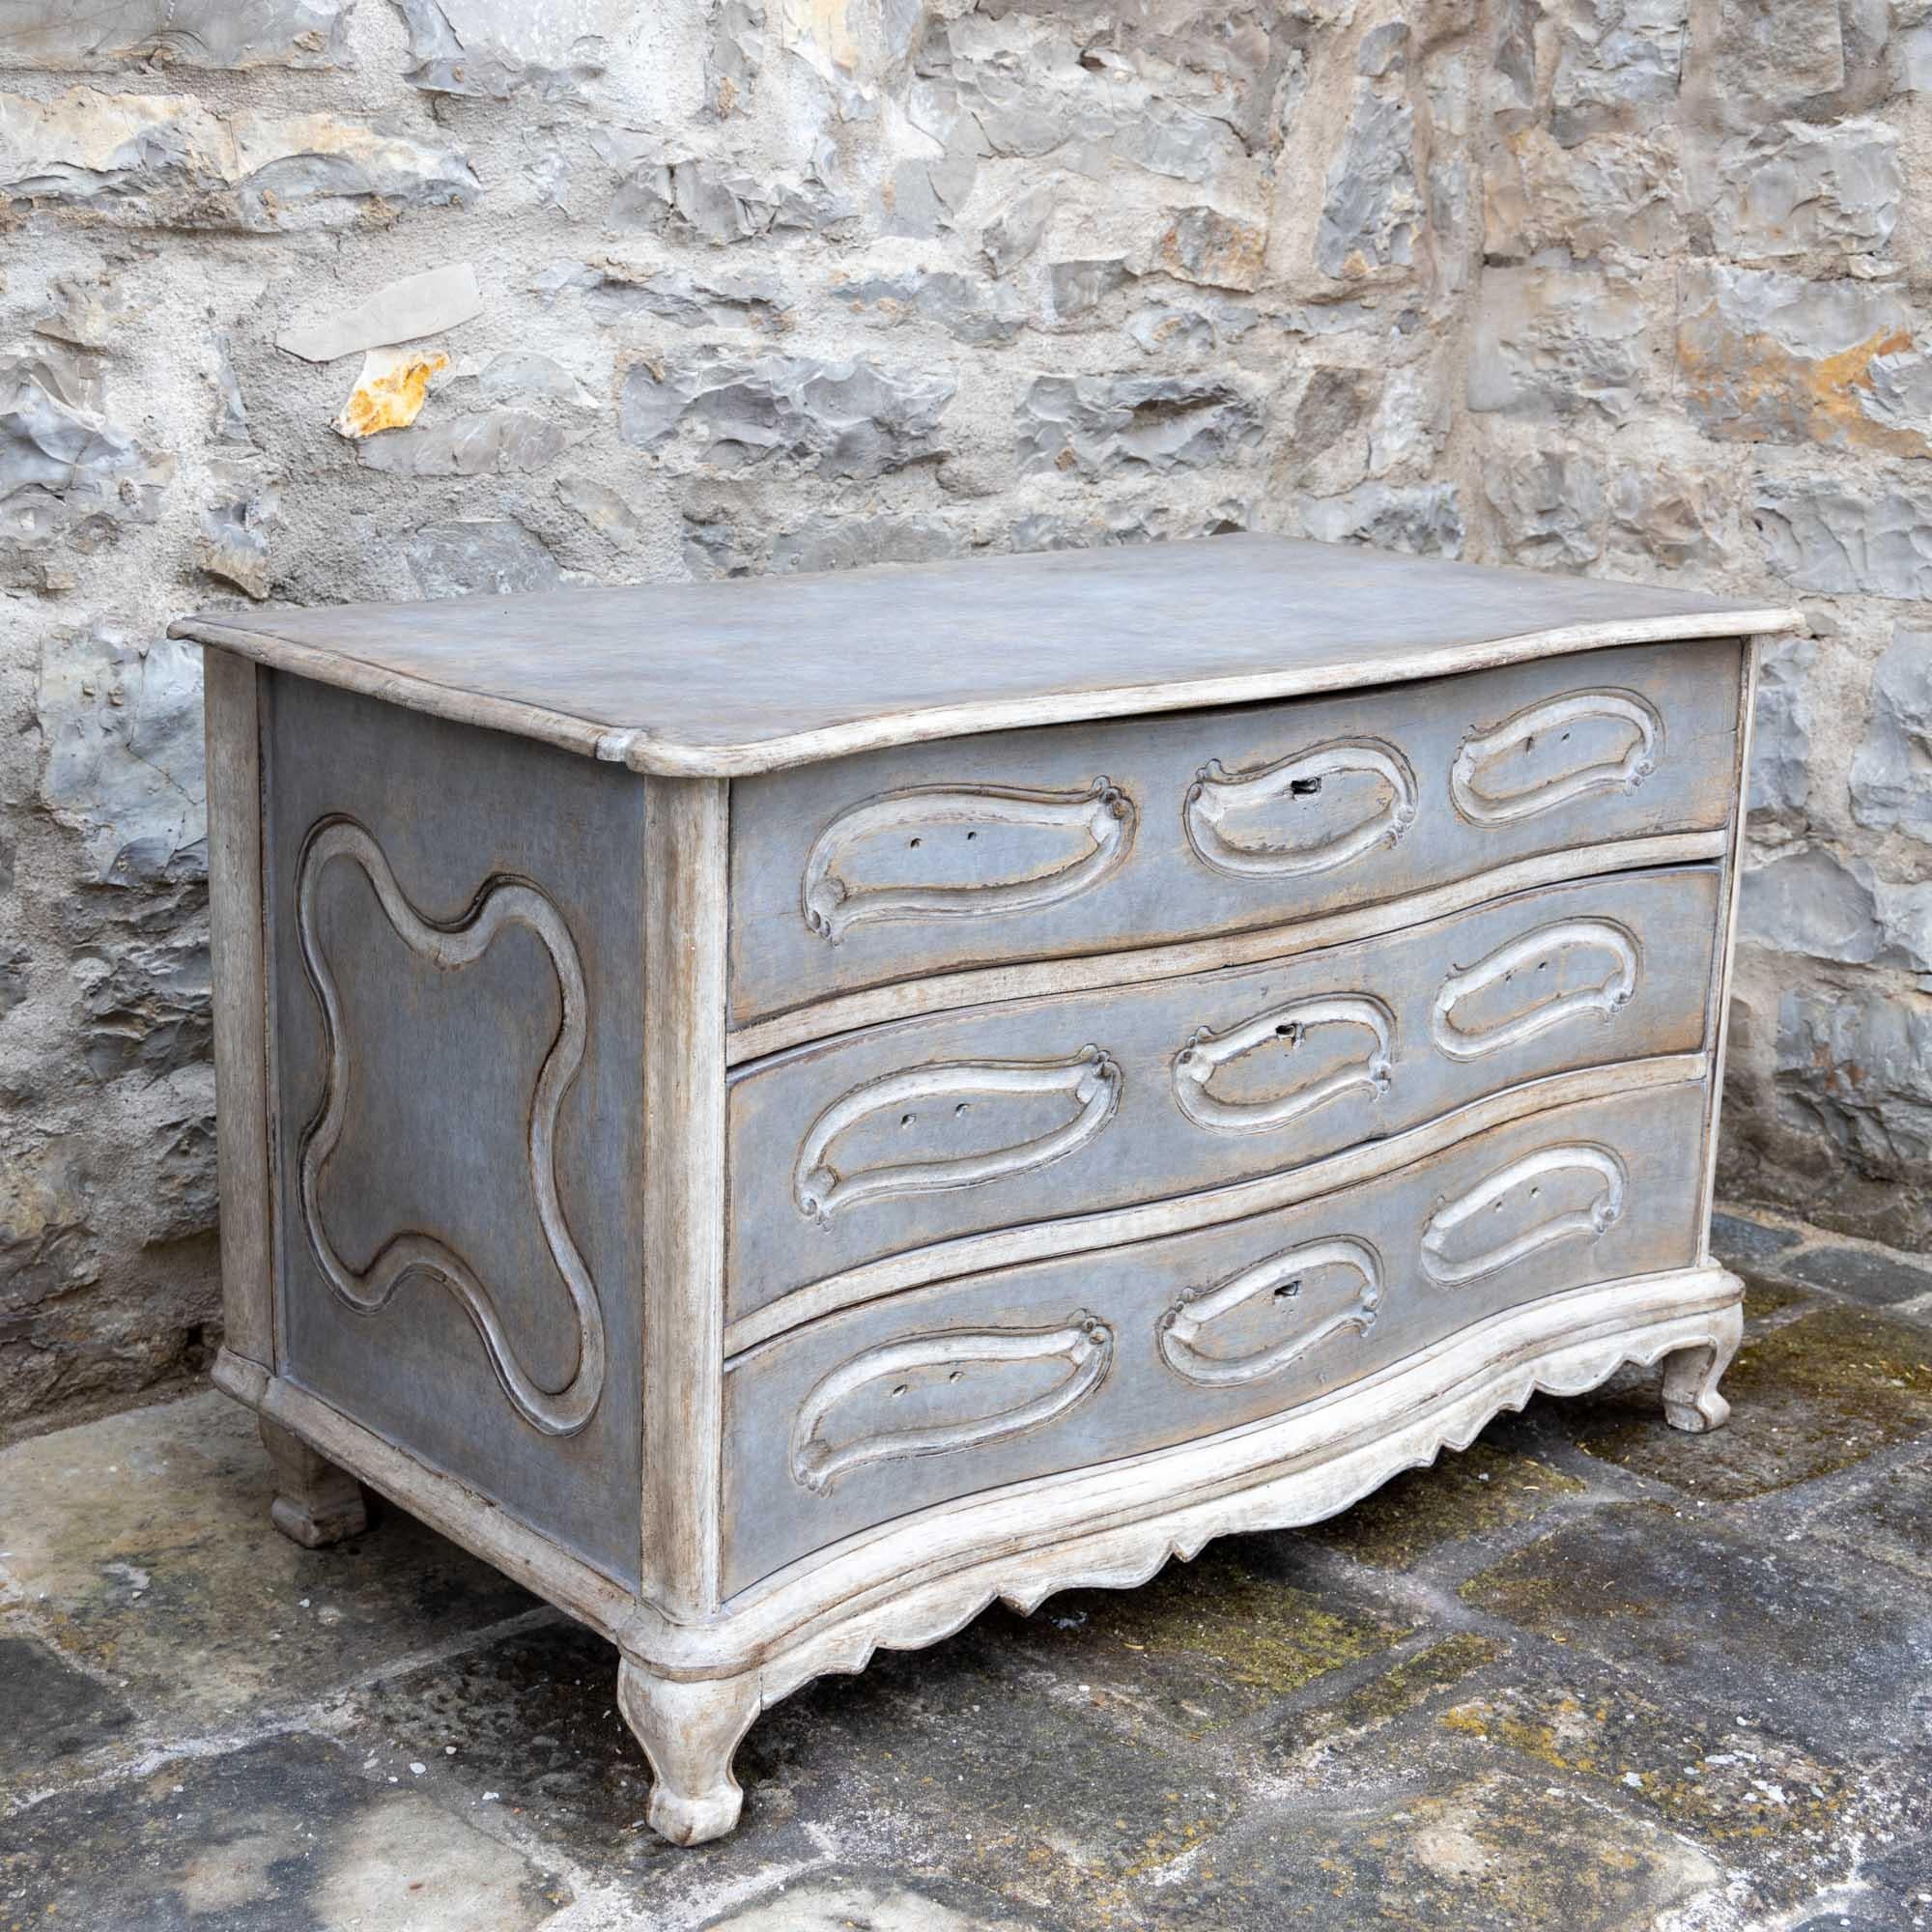 A three-drawer baroque chest of drawers with a moving panel and a curved frame. The frame in light grey and creamy white is new and has been decoratively patinated.